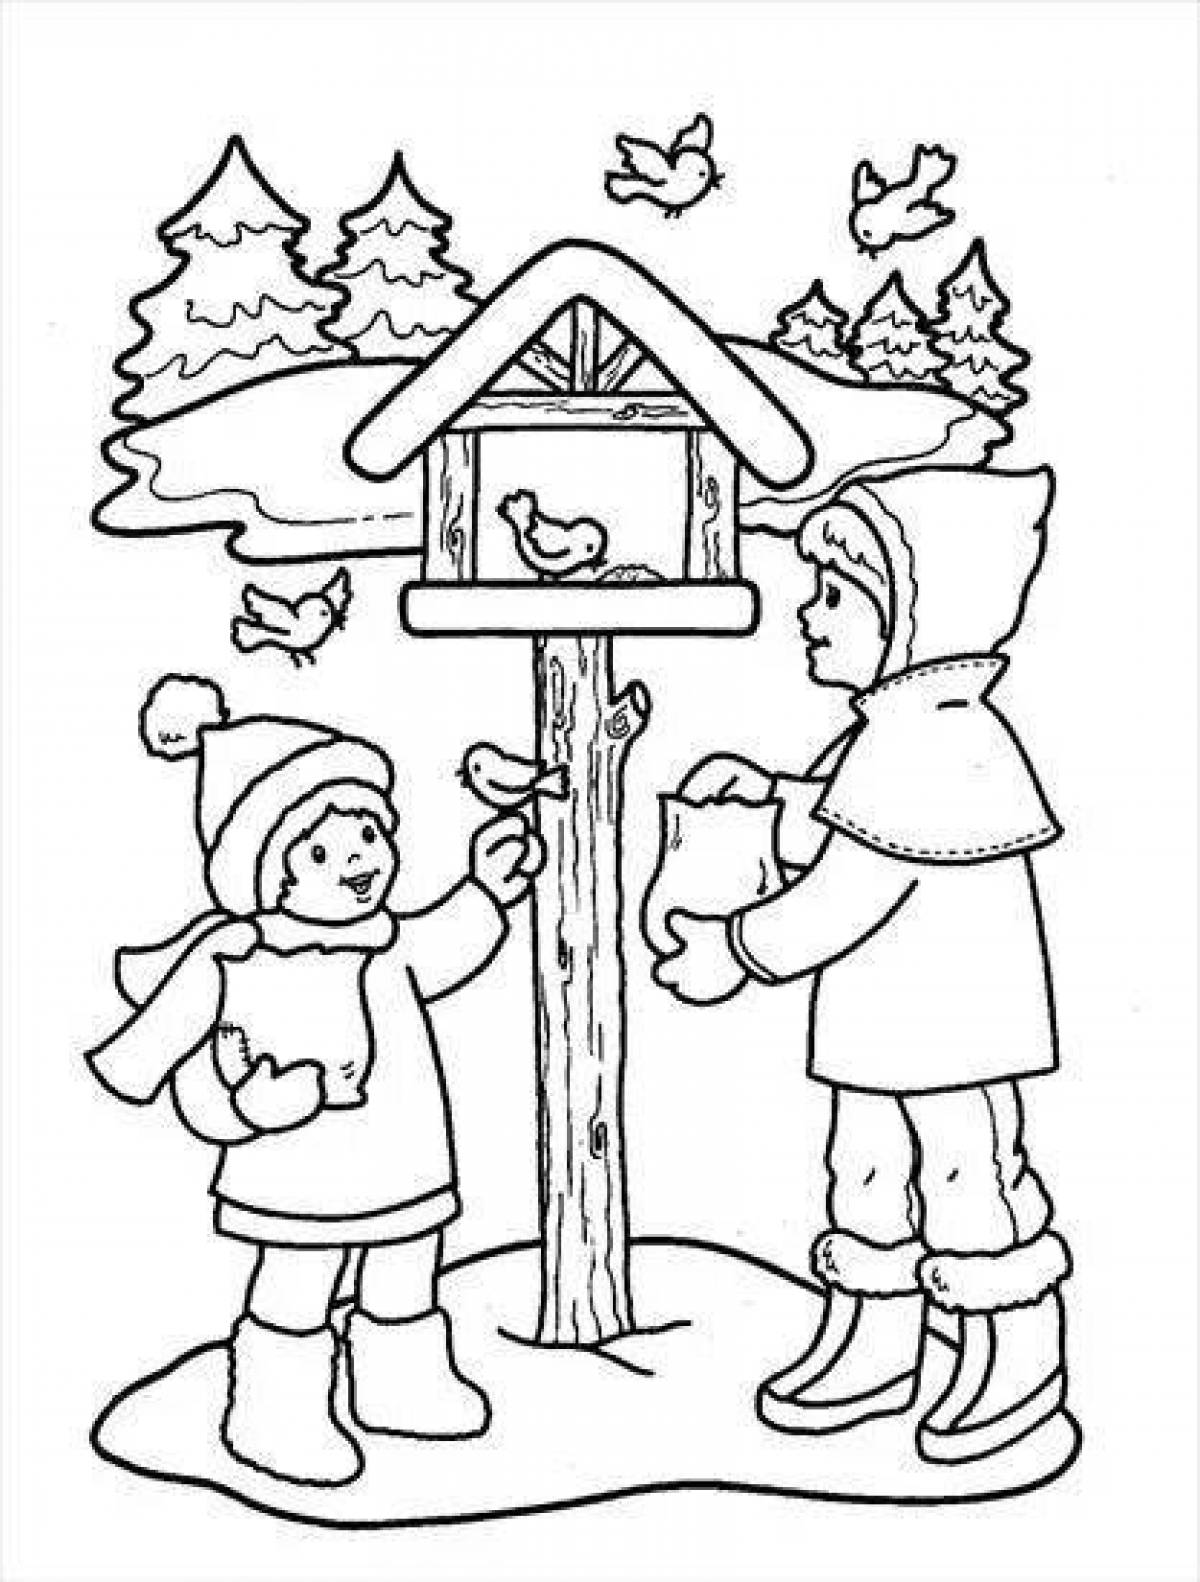 Amazing winter birds coloring pages for kids